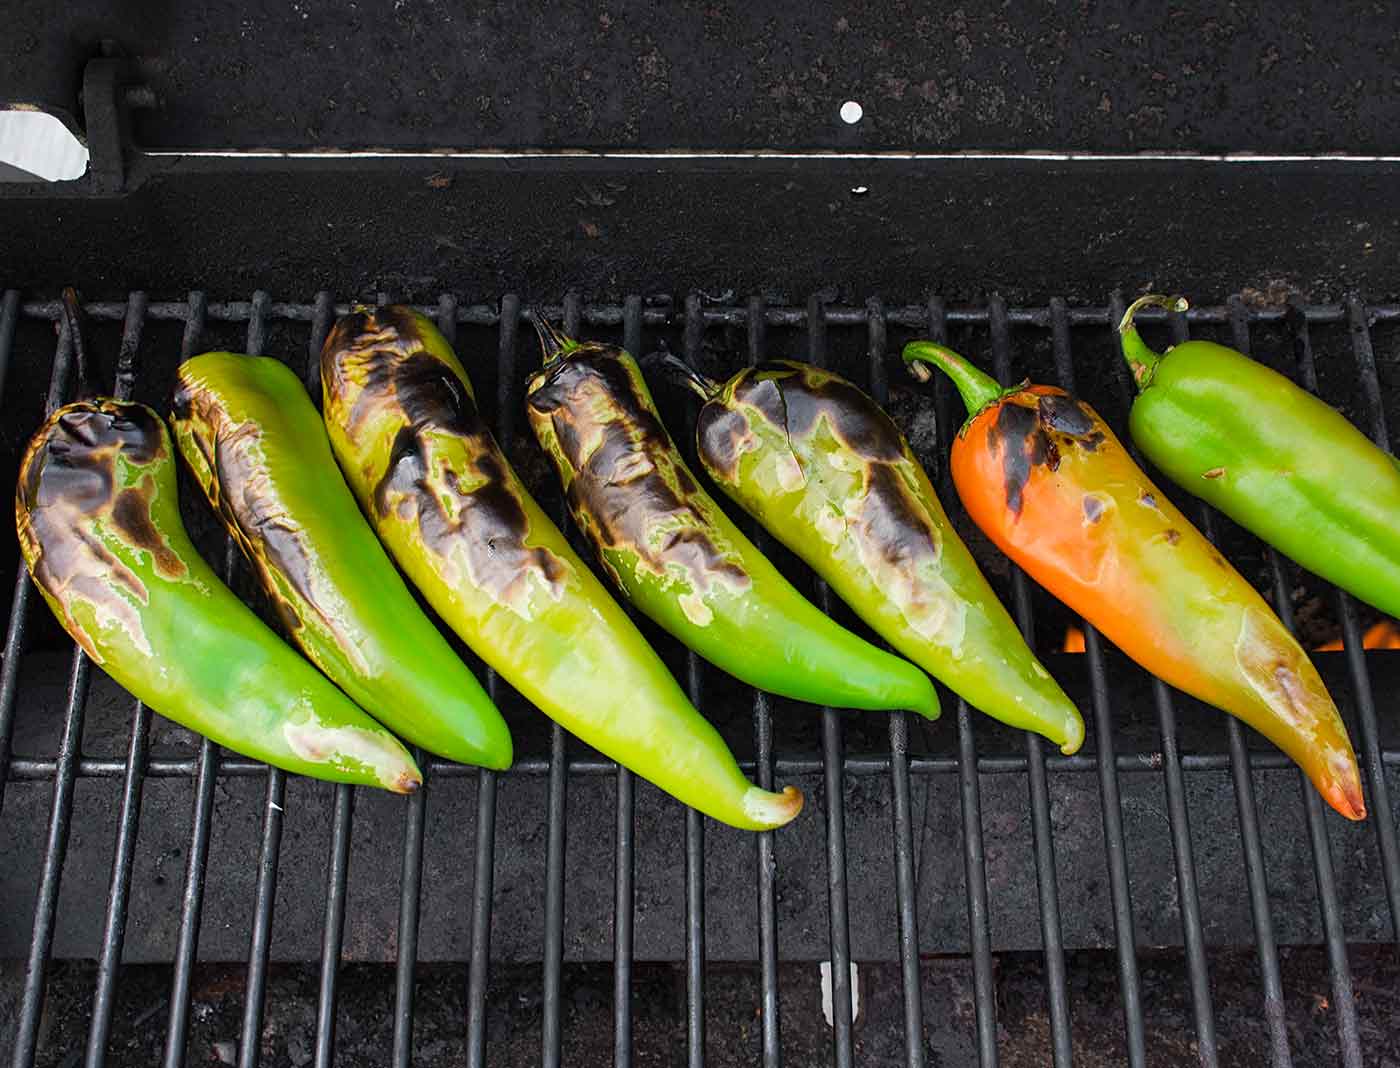 Hatch chiles roasting on the grill